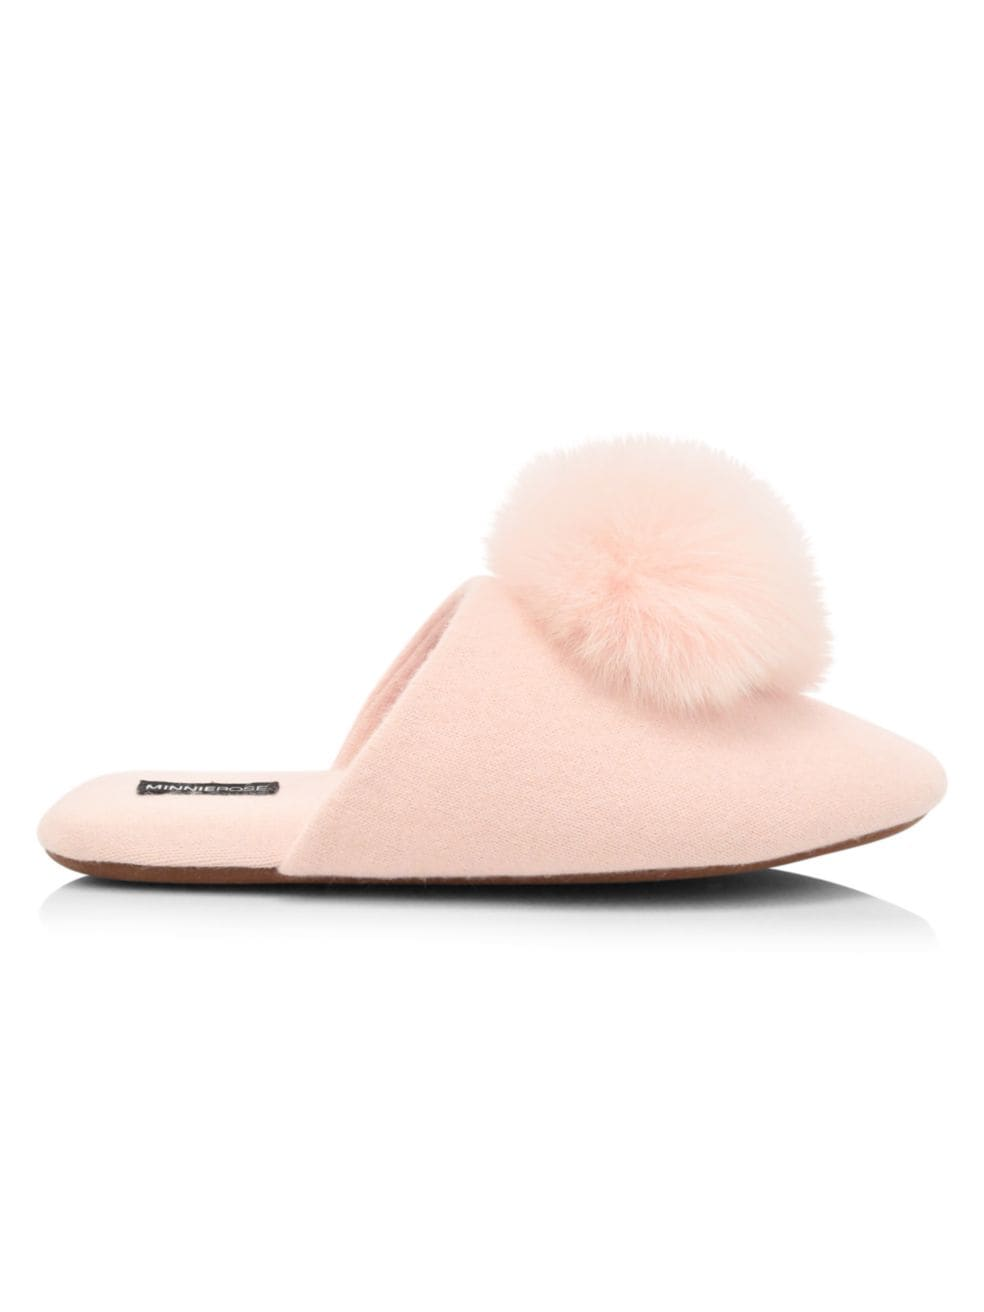 The 15+ Best Slippers for Women 